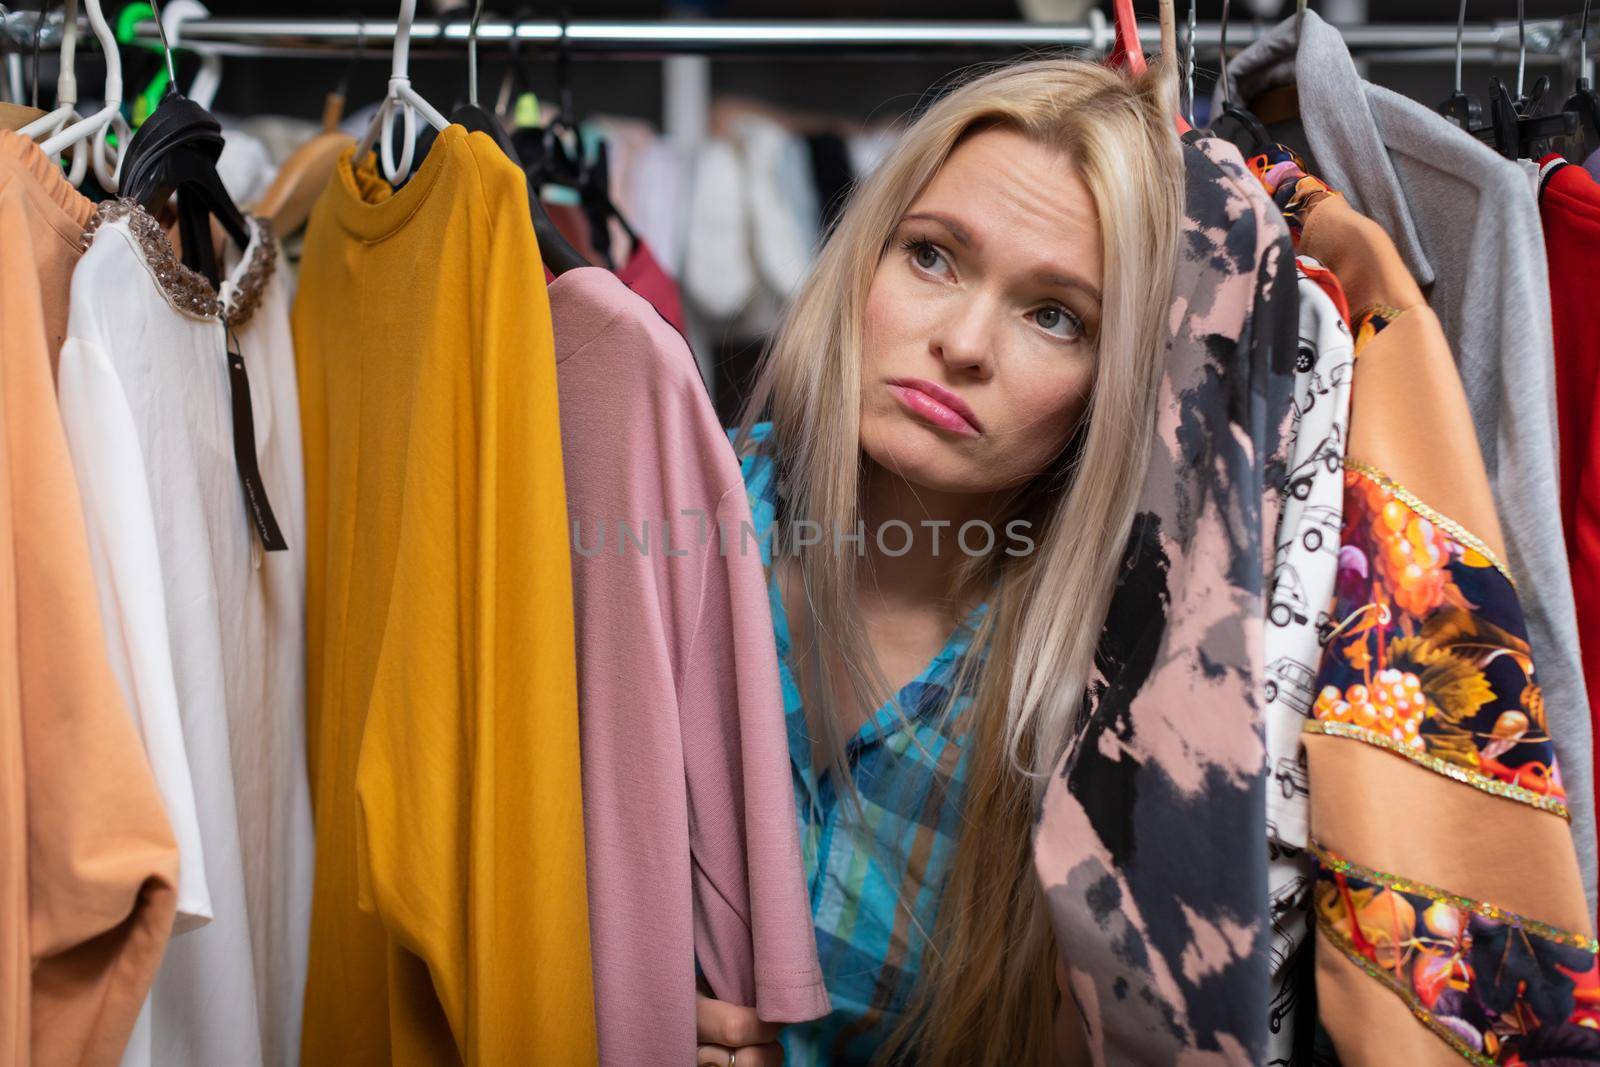 A sad blonde woman shopping in a clothing store. by fotodrobik